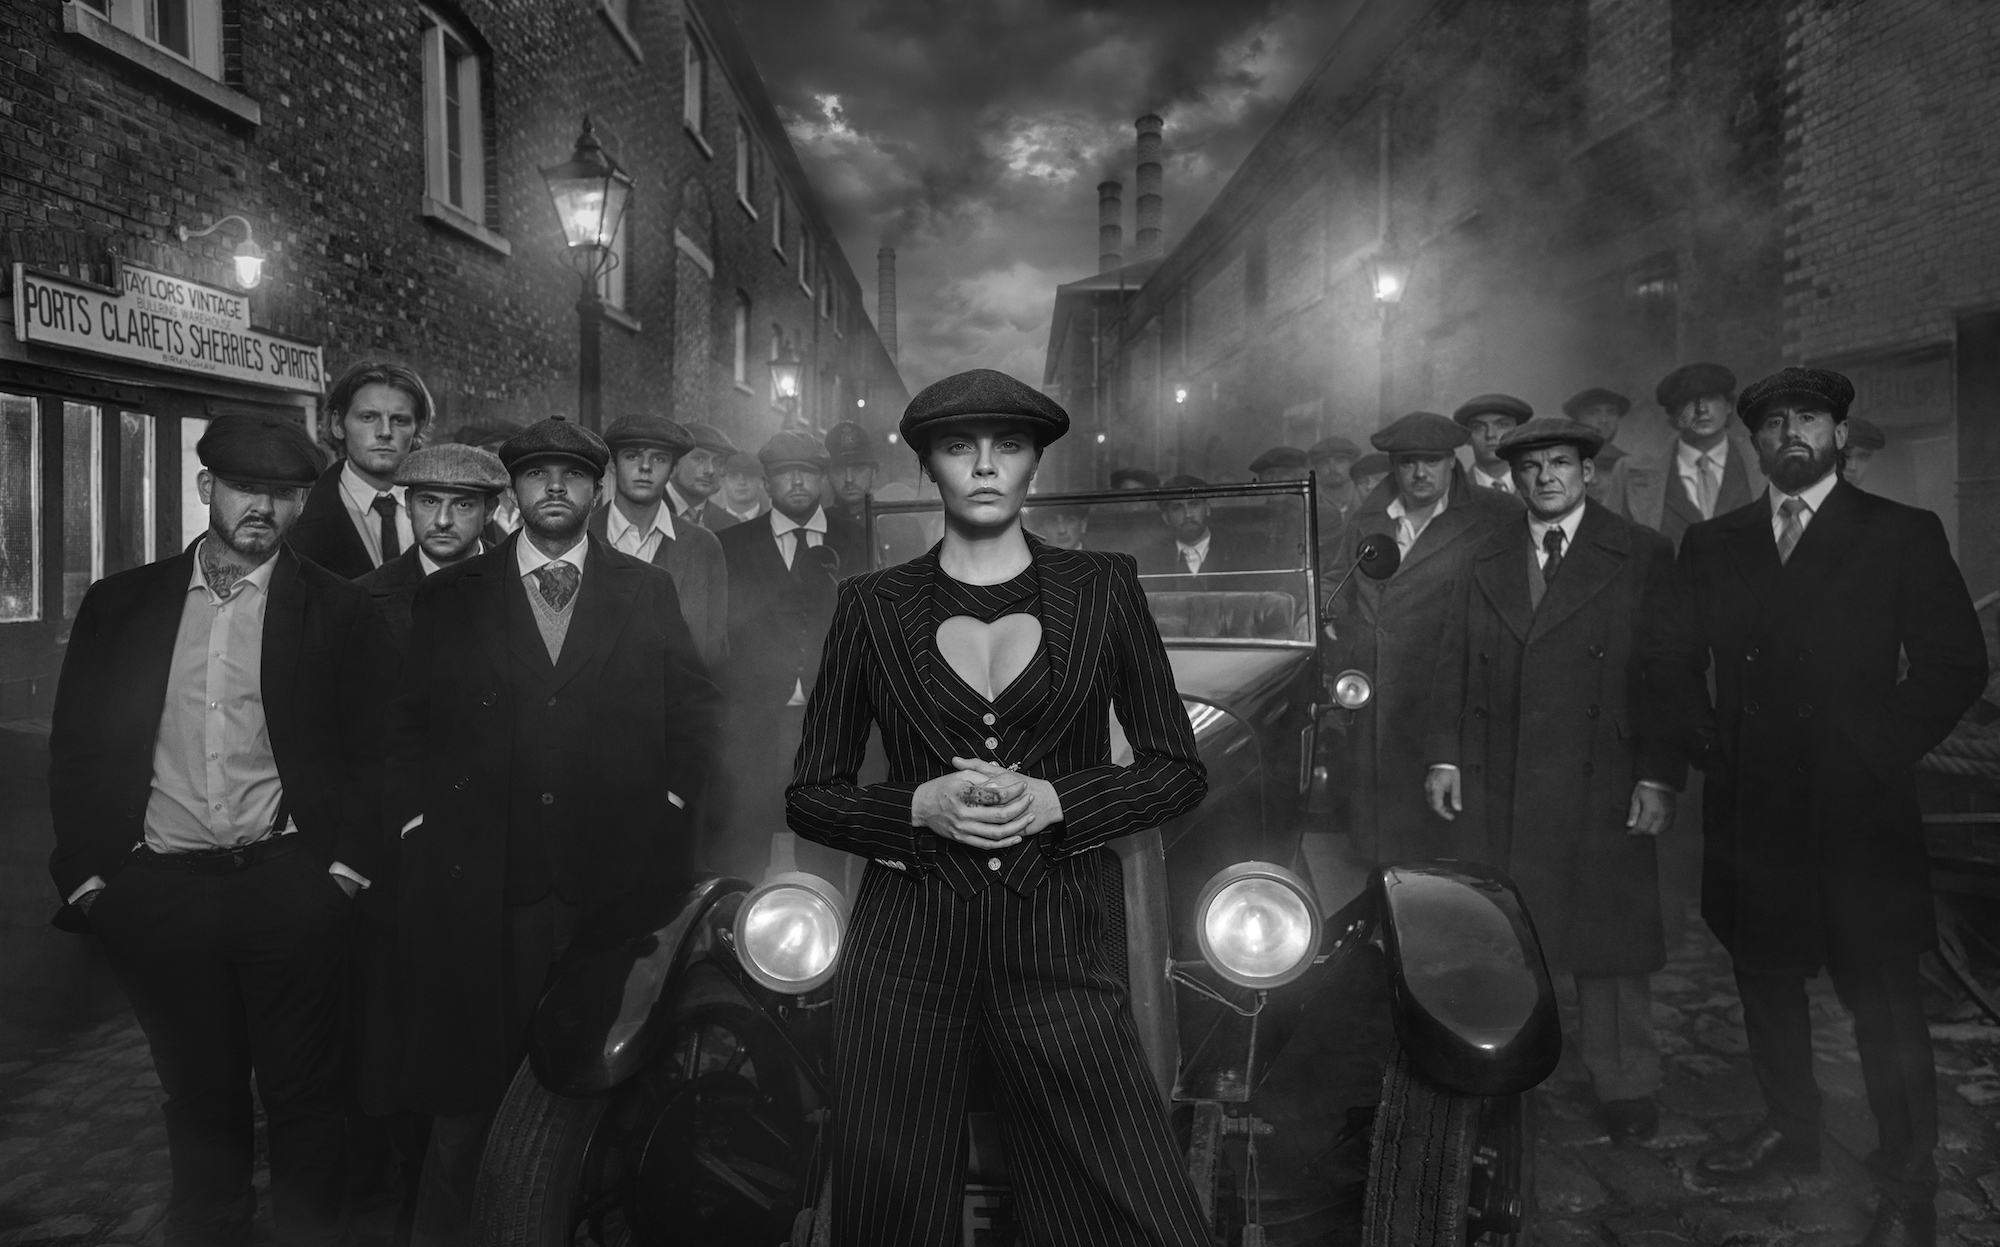 By Order of the Peaky Blinders by David Yarrow, from Storytelling at Maddox Gallery